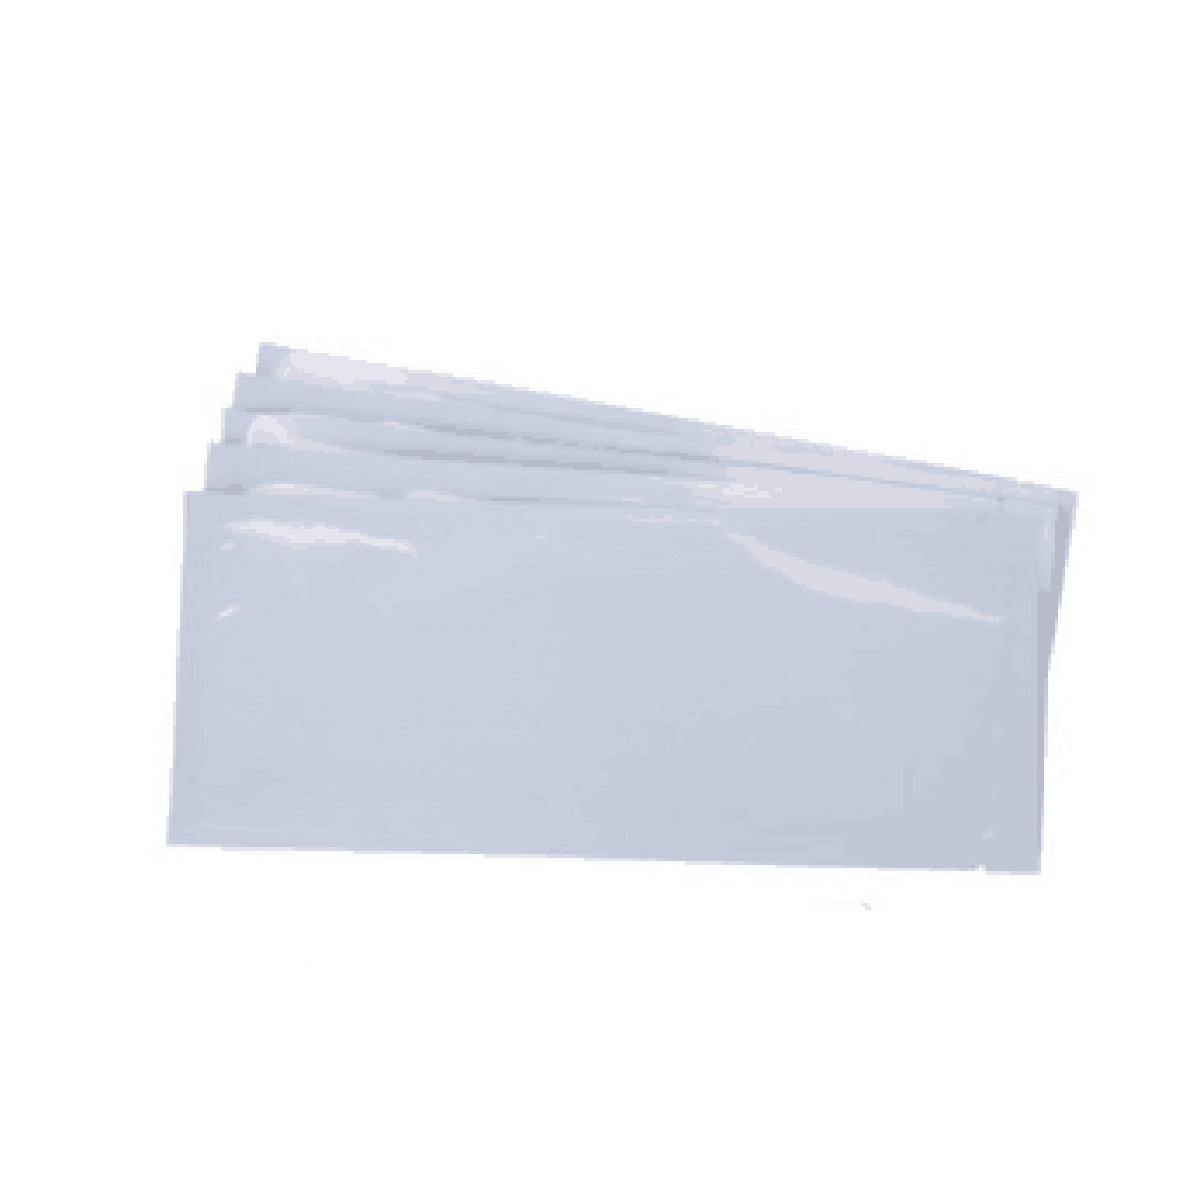 10pcs MAGICARD Card printer Long T cleaning card 191mm - Click Image to Close